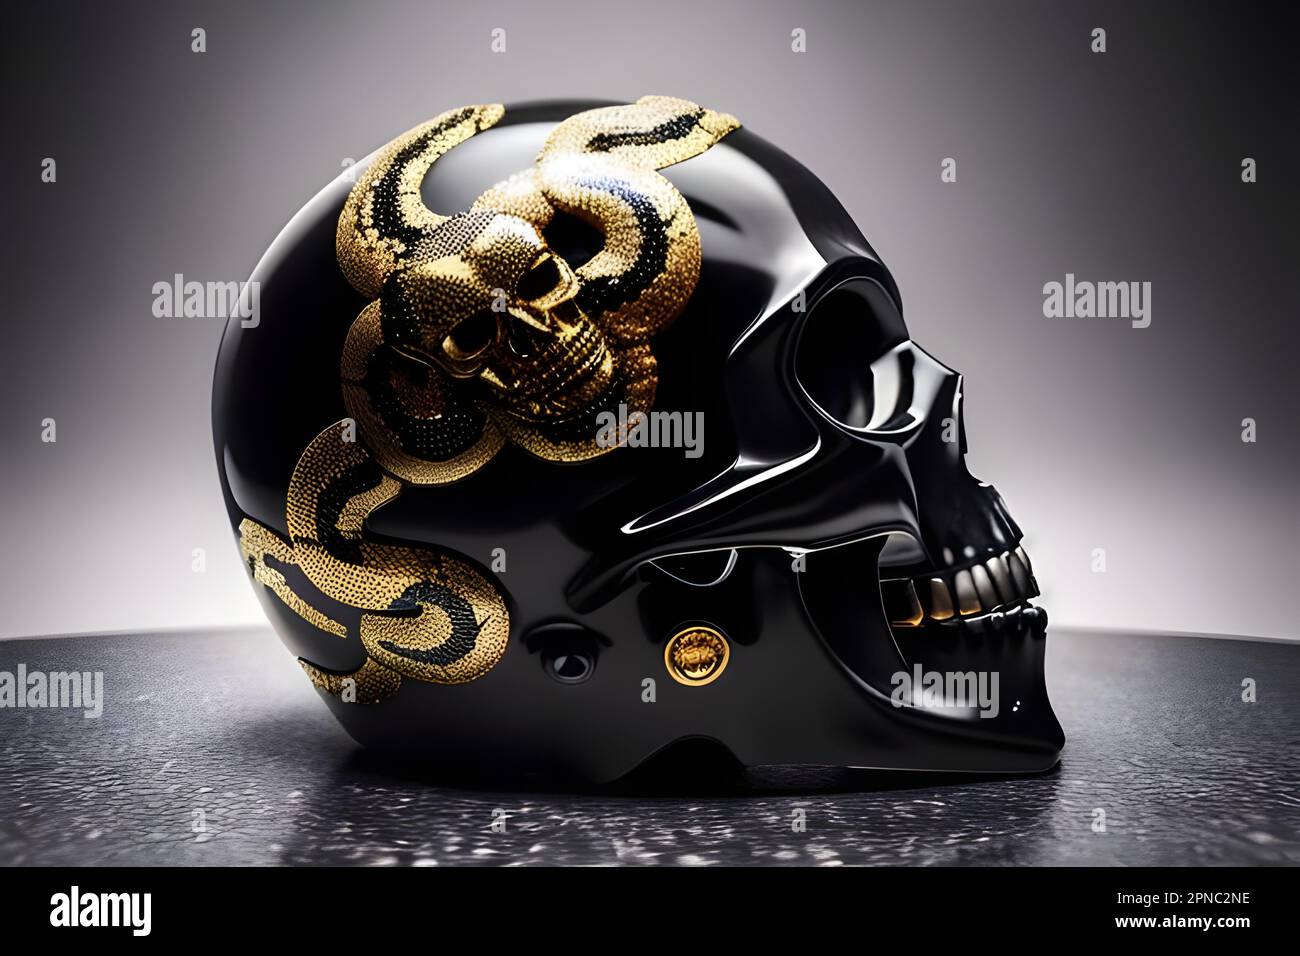 A human skull wearing a black and gold serpentine headdress, with the snakes intertwined around the helmet Stock Photo